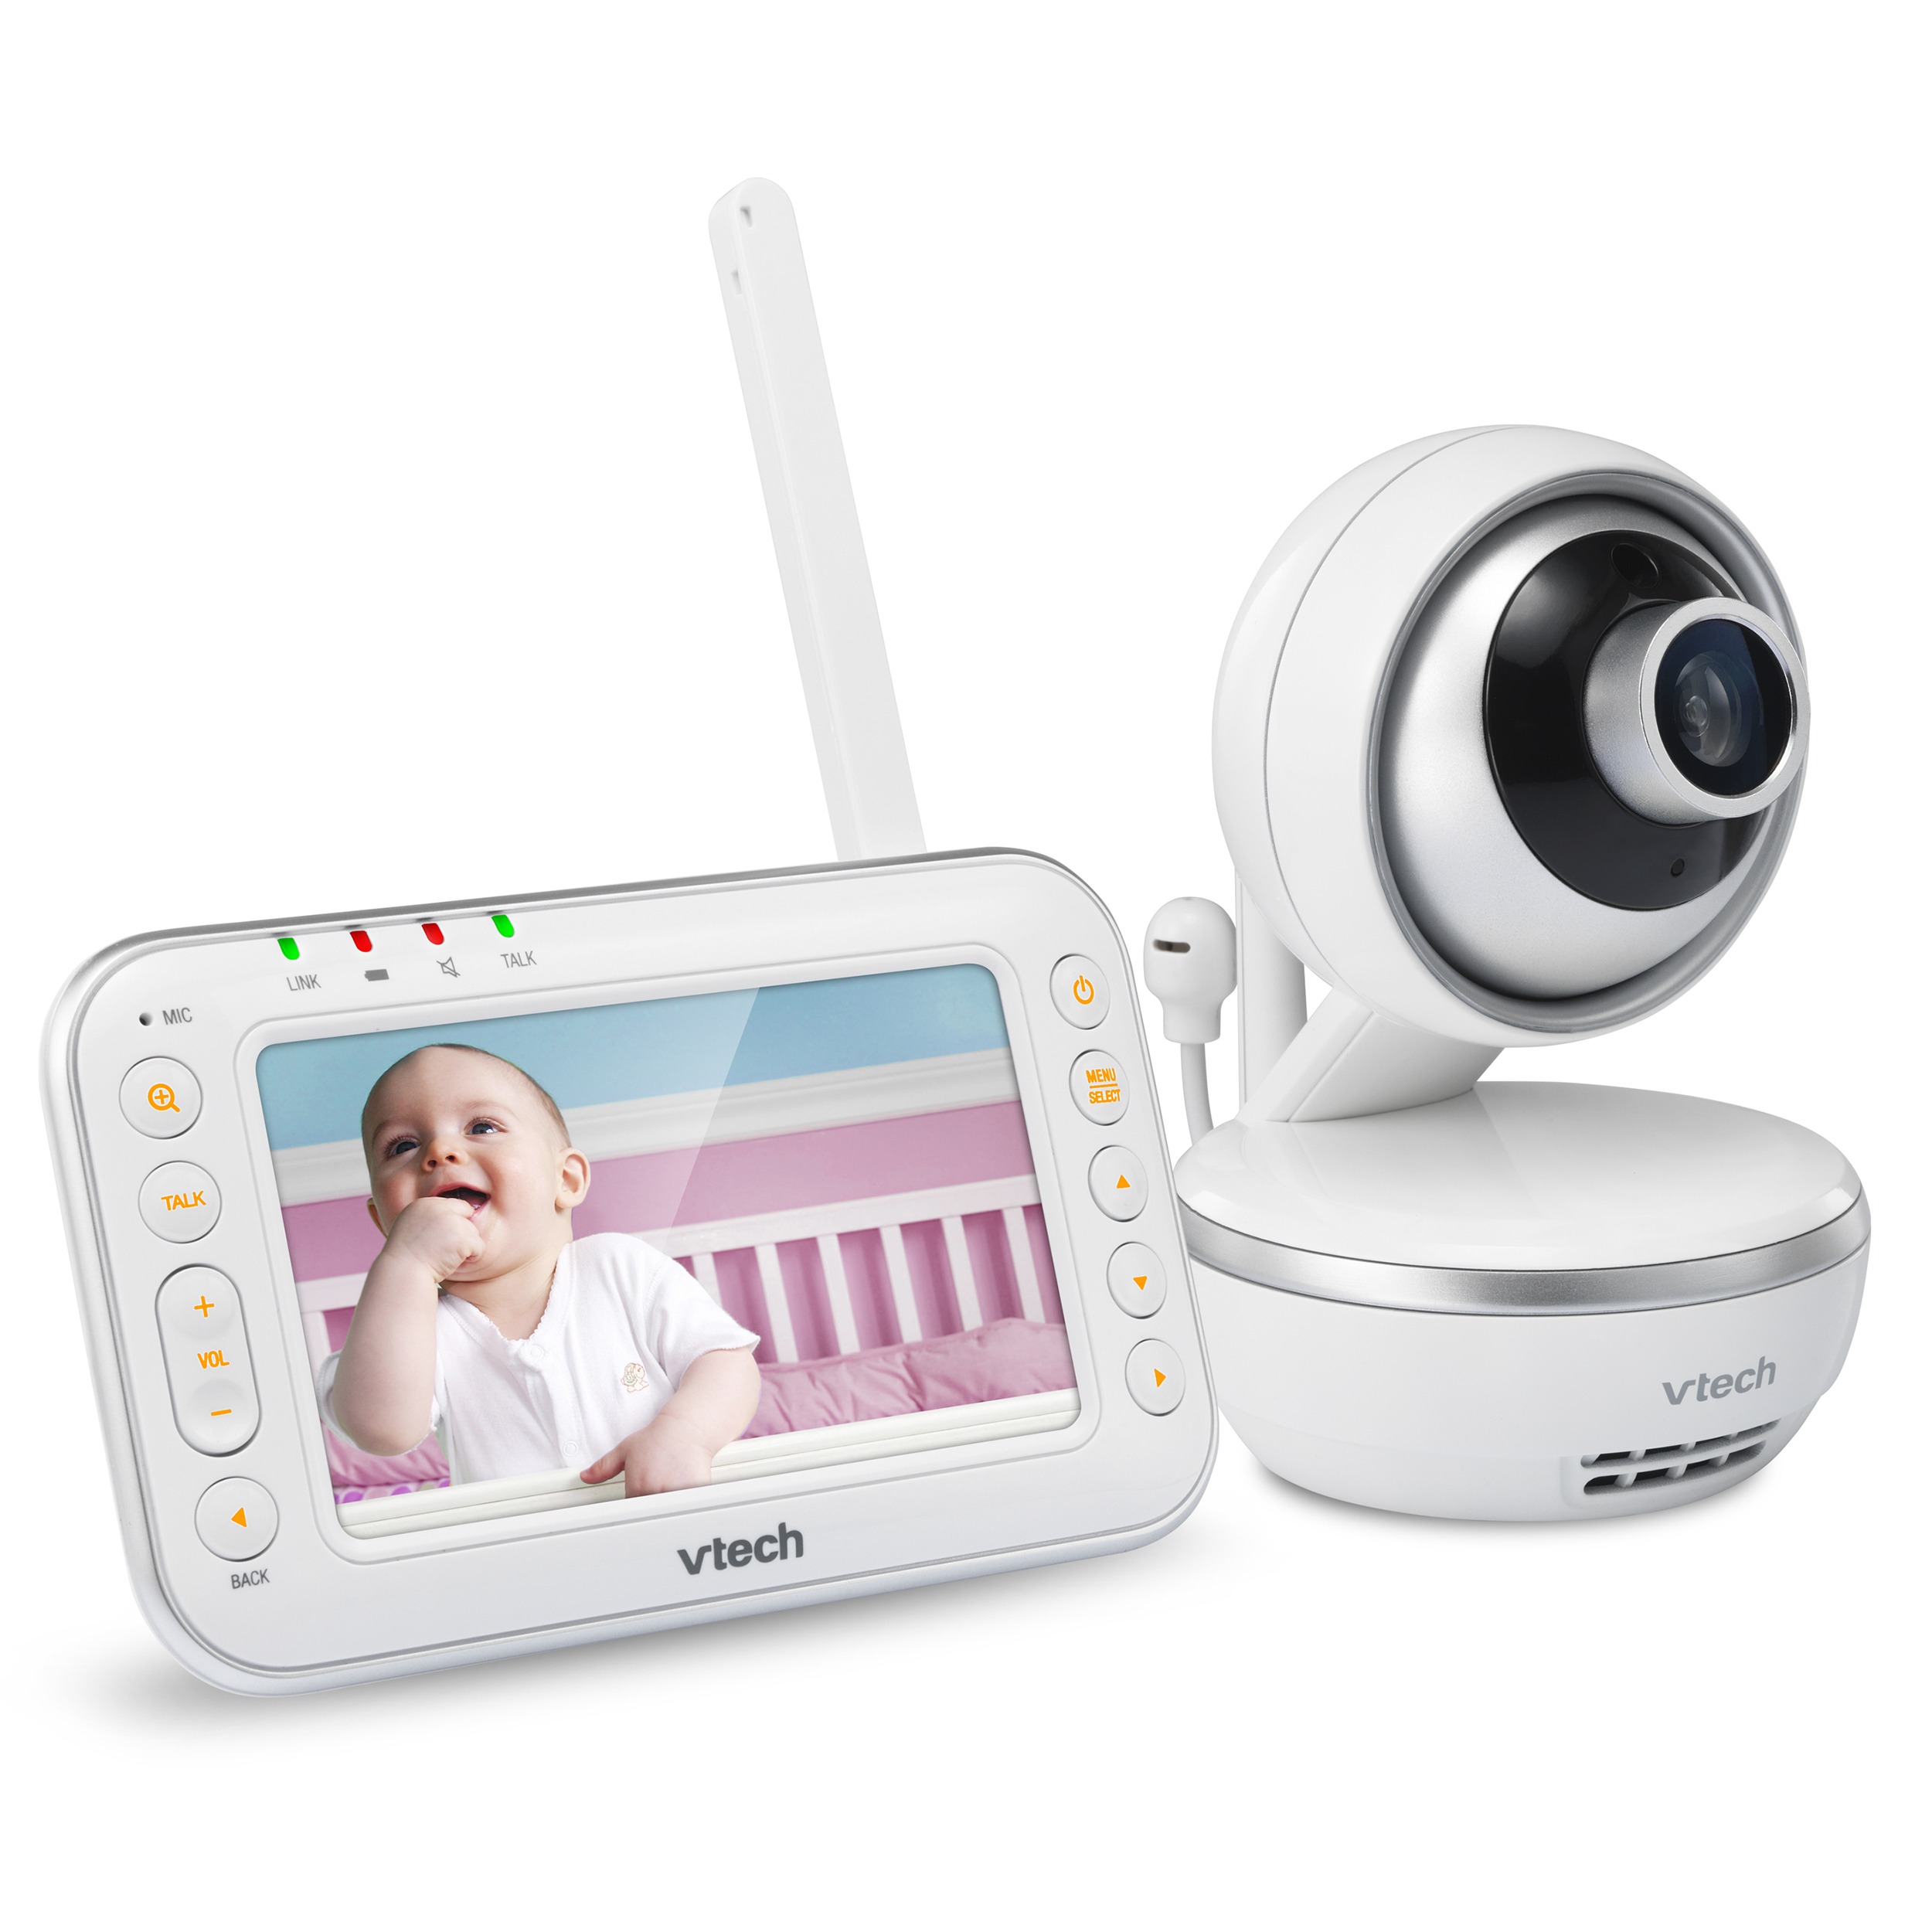 VTech VM4261, 4.3" Digital Video Baby Monitor with Pan & Tilt Camera, Wide-Angle Lens and Standard Lens, White - image 4 of 13